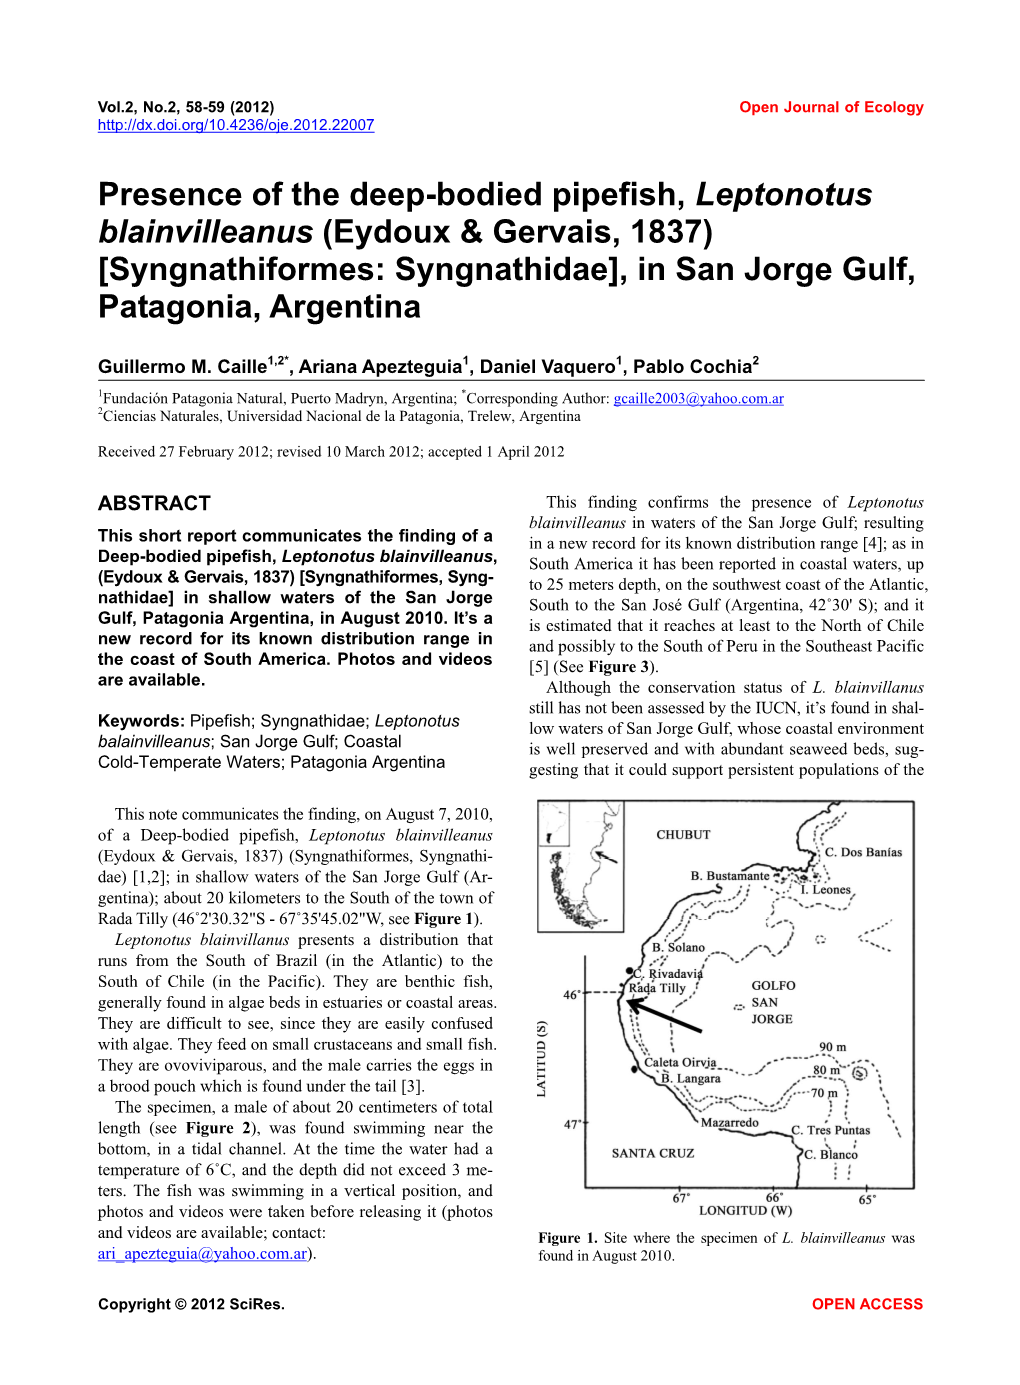 Presence of the Deep-Bodied Pipefish, Leptonotus Blainvilleanus (Eydoux & Gervais, 1837) [Syngnathiformes: Syngnathidae], In